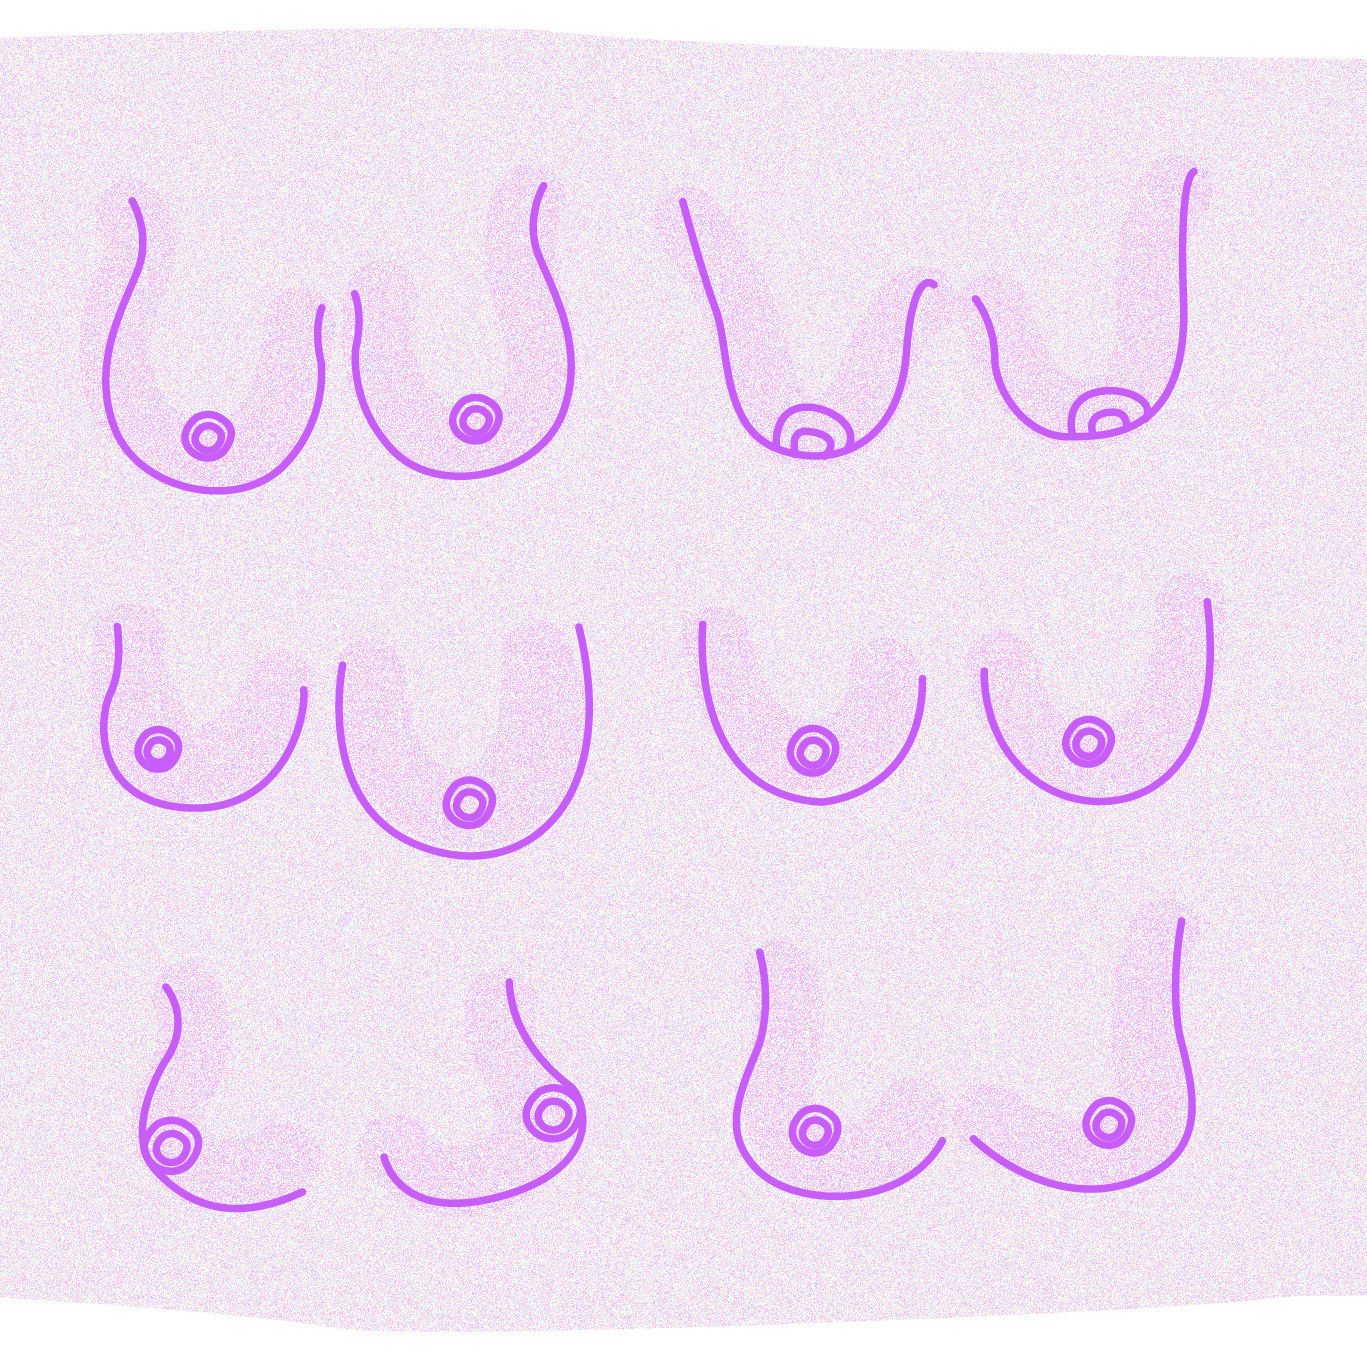 breast pictures by cup size